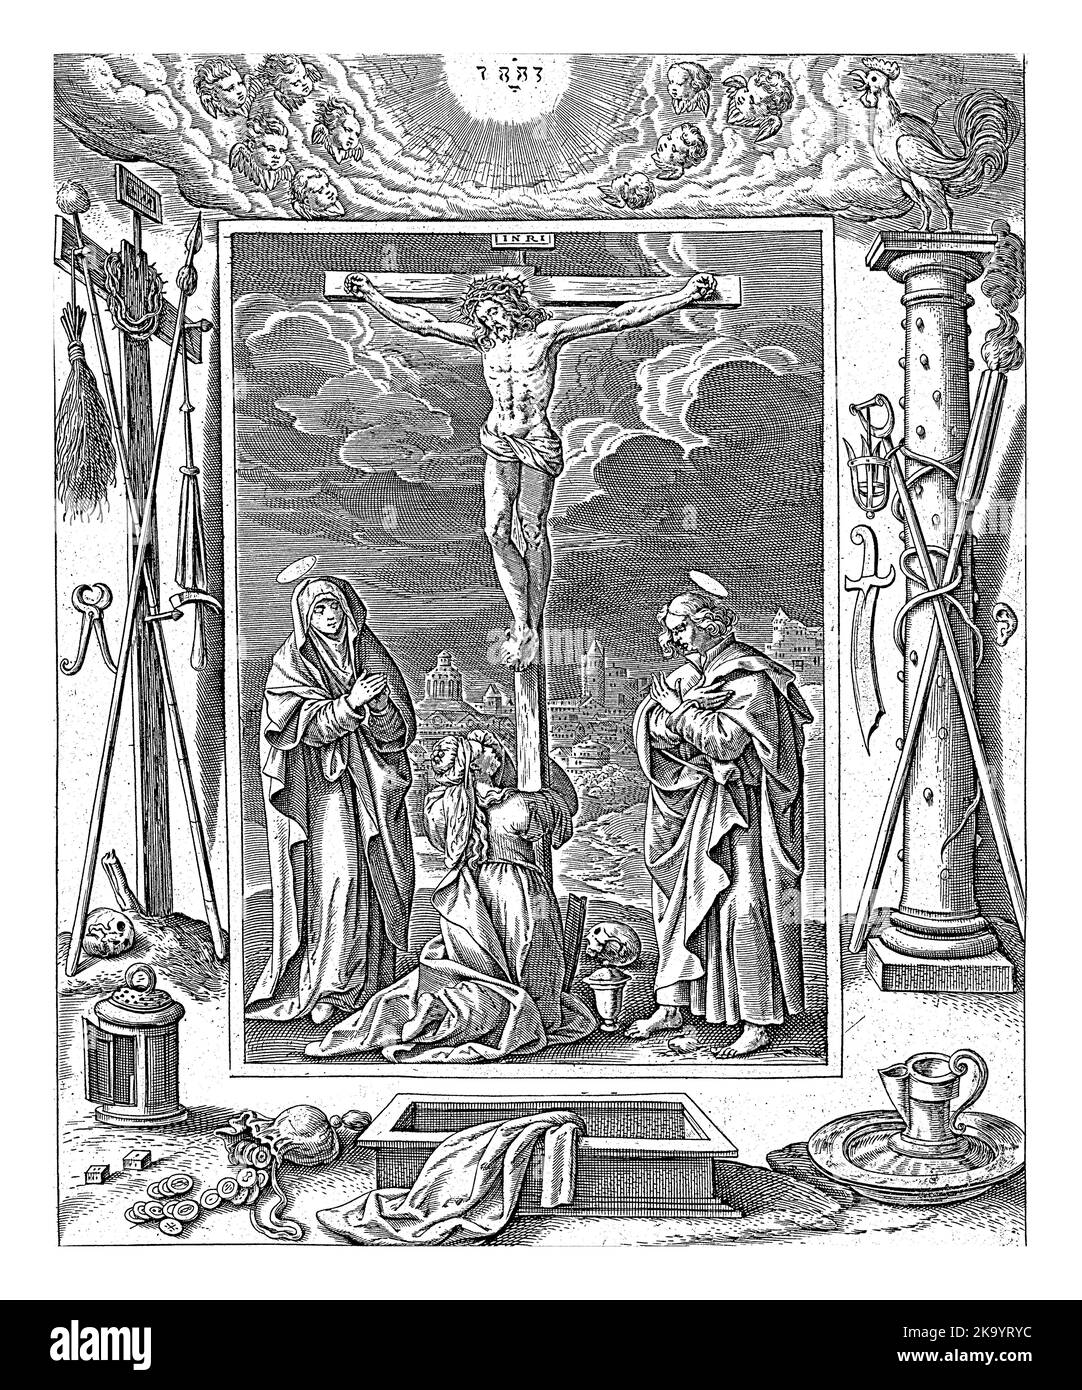 Crucifixion of Christ, Antonie Wierix (II), after Maerten de Vos, 1582 - 1586 The Crucifixion of Christ on Mount Golgotha. Under the cross are Mary Ma Stock Photo